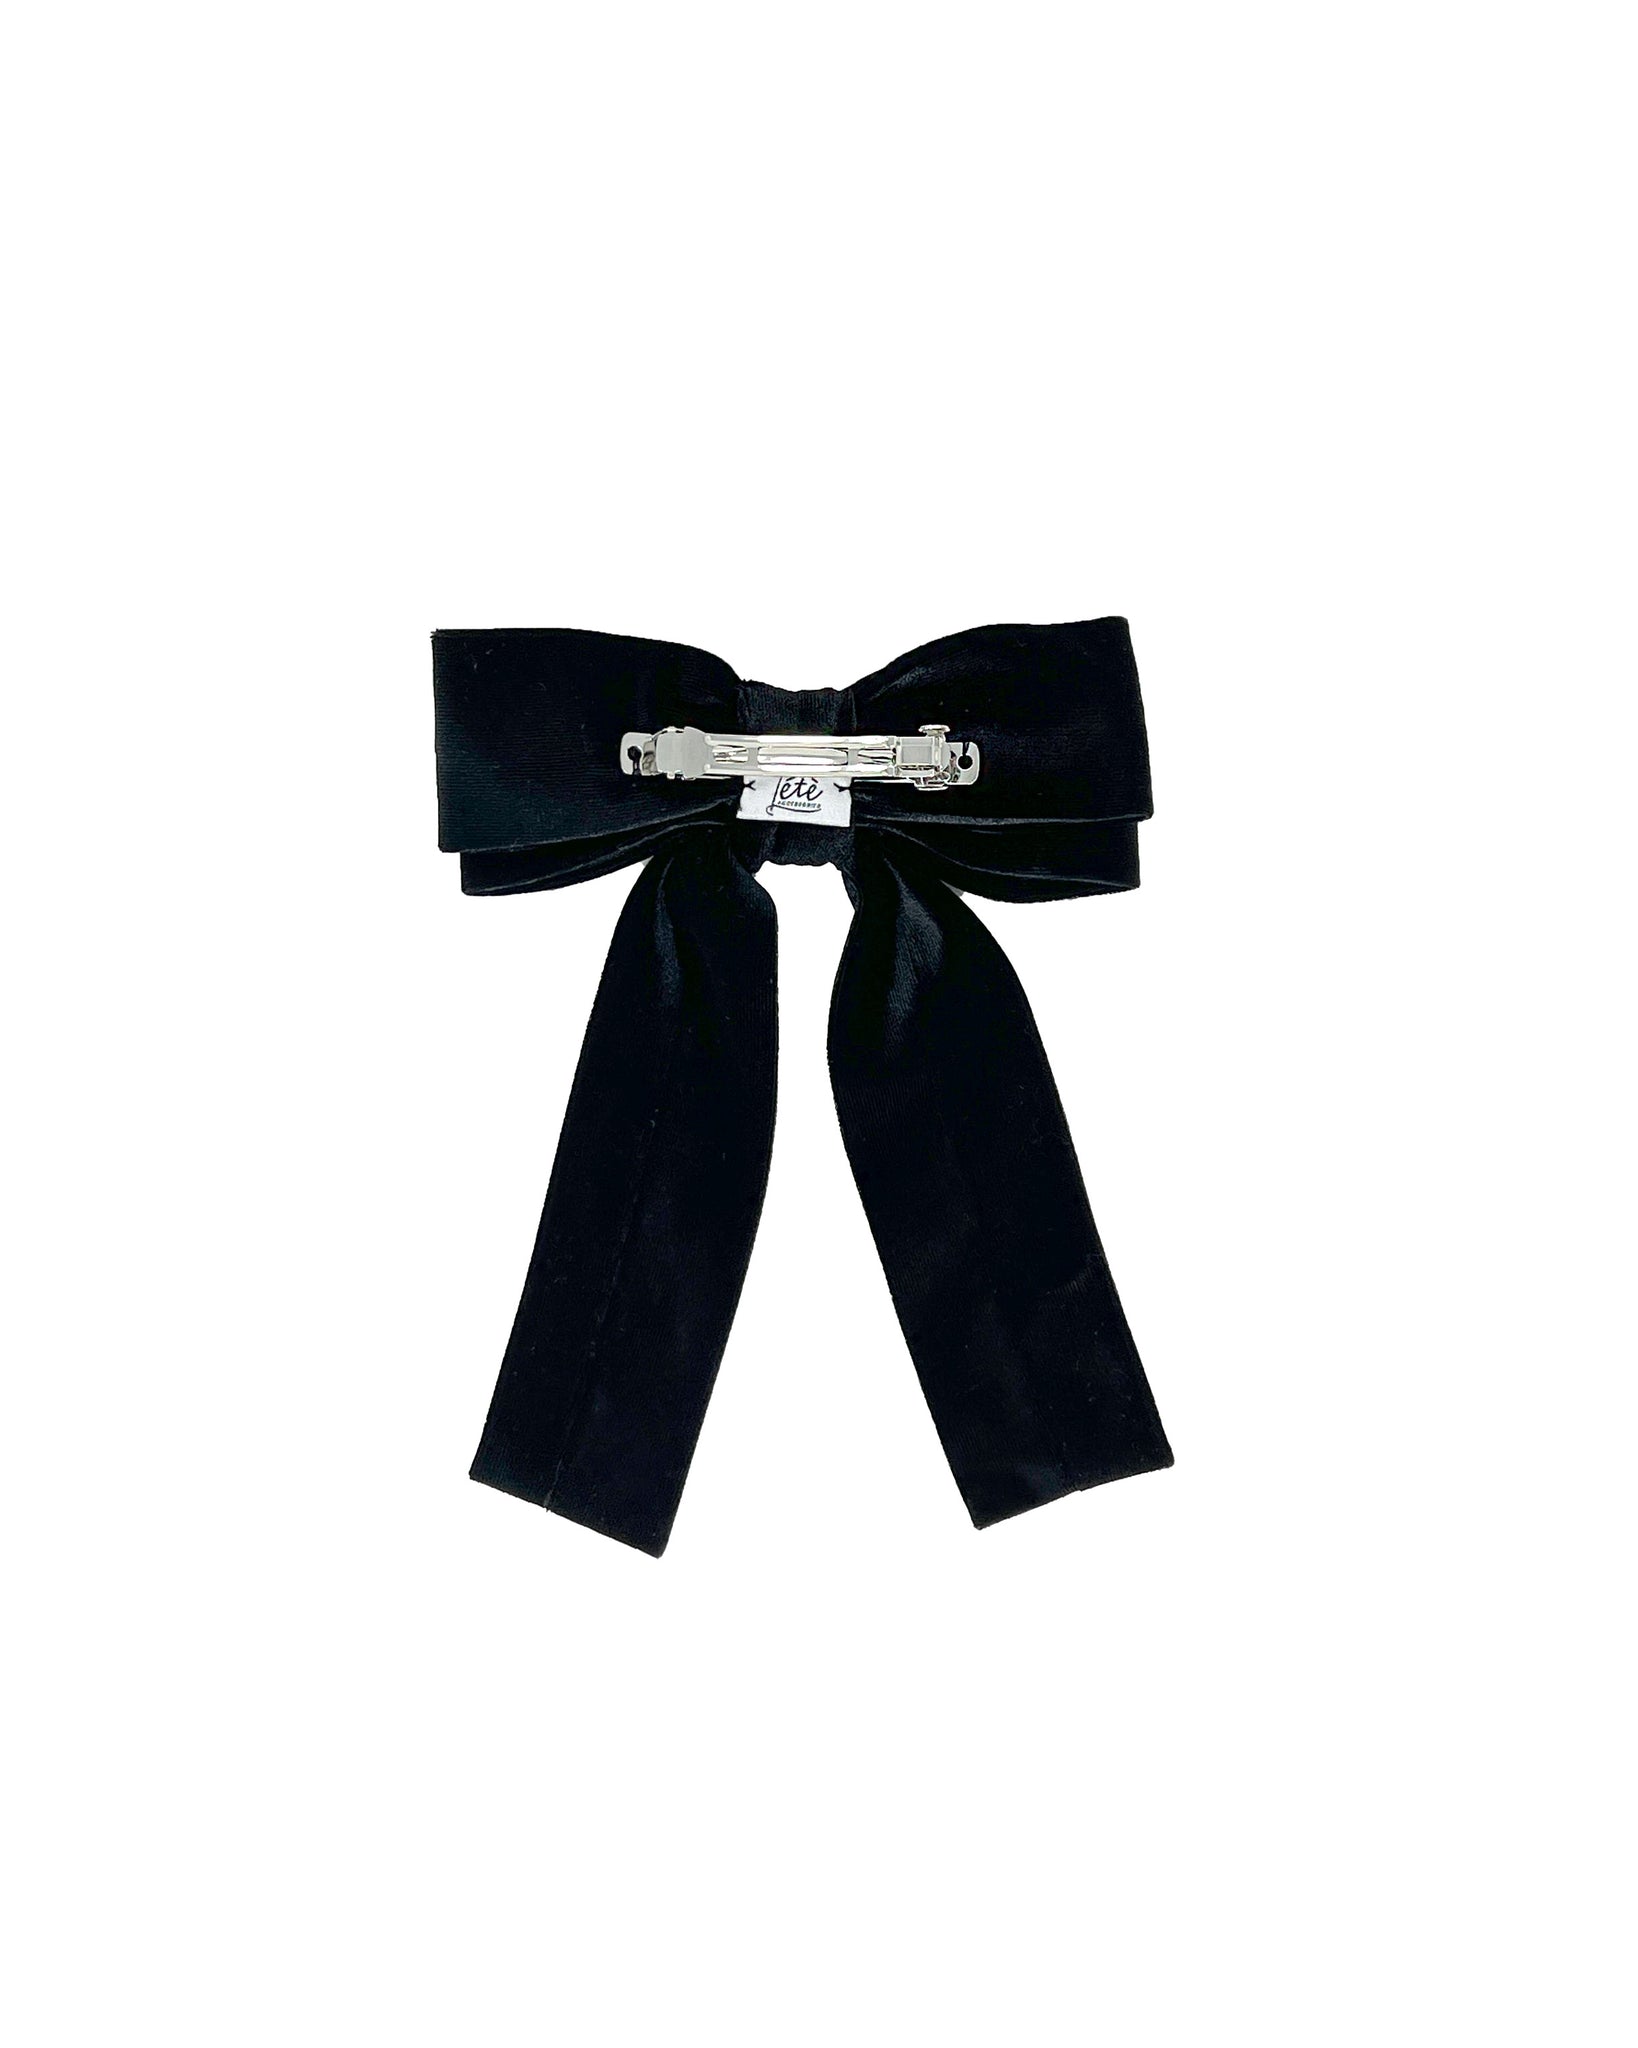 Black velvet bow barrette with embroidered initial